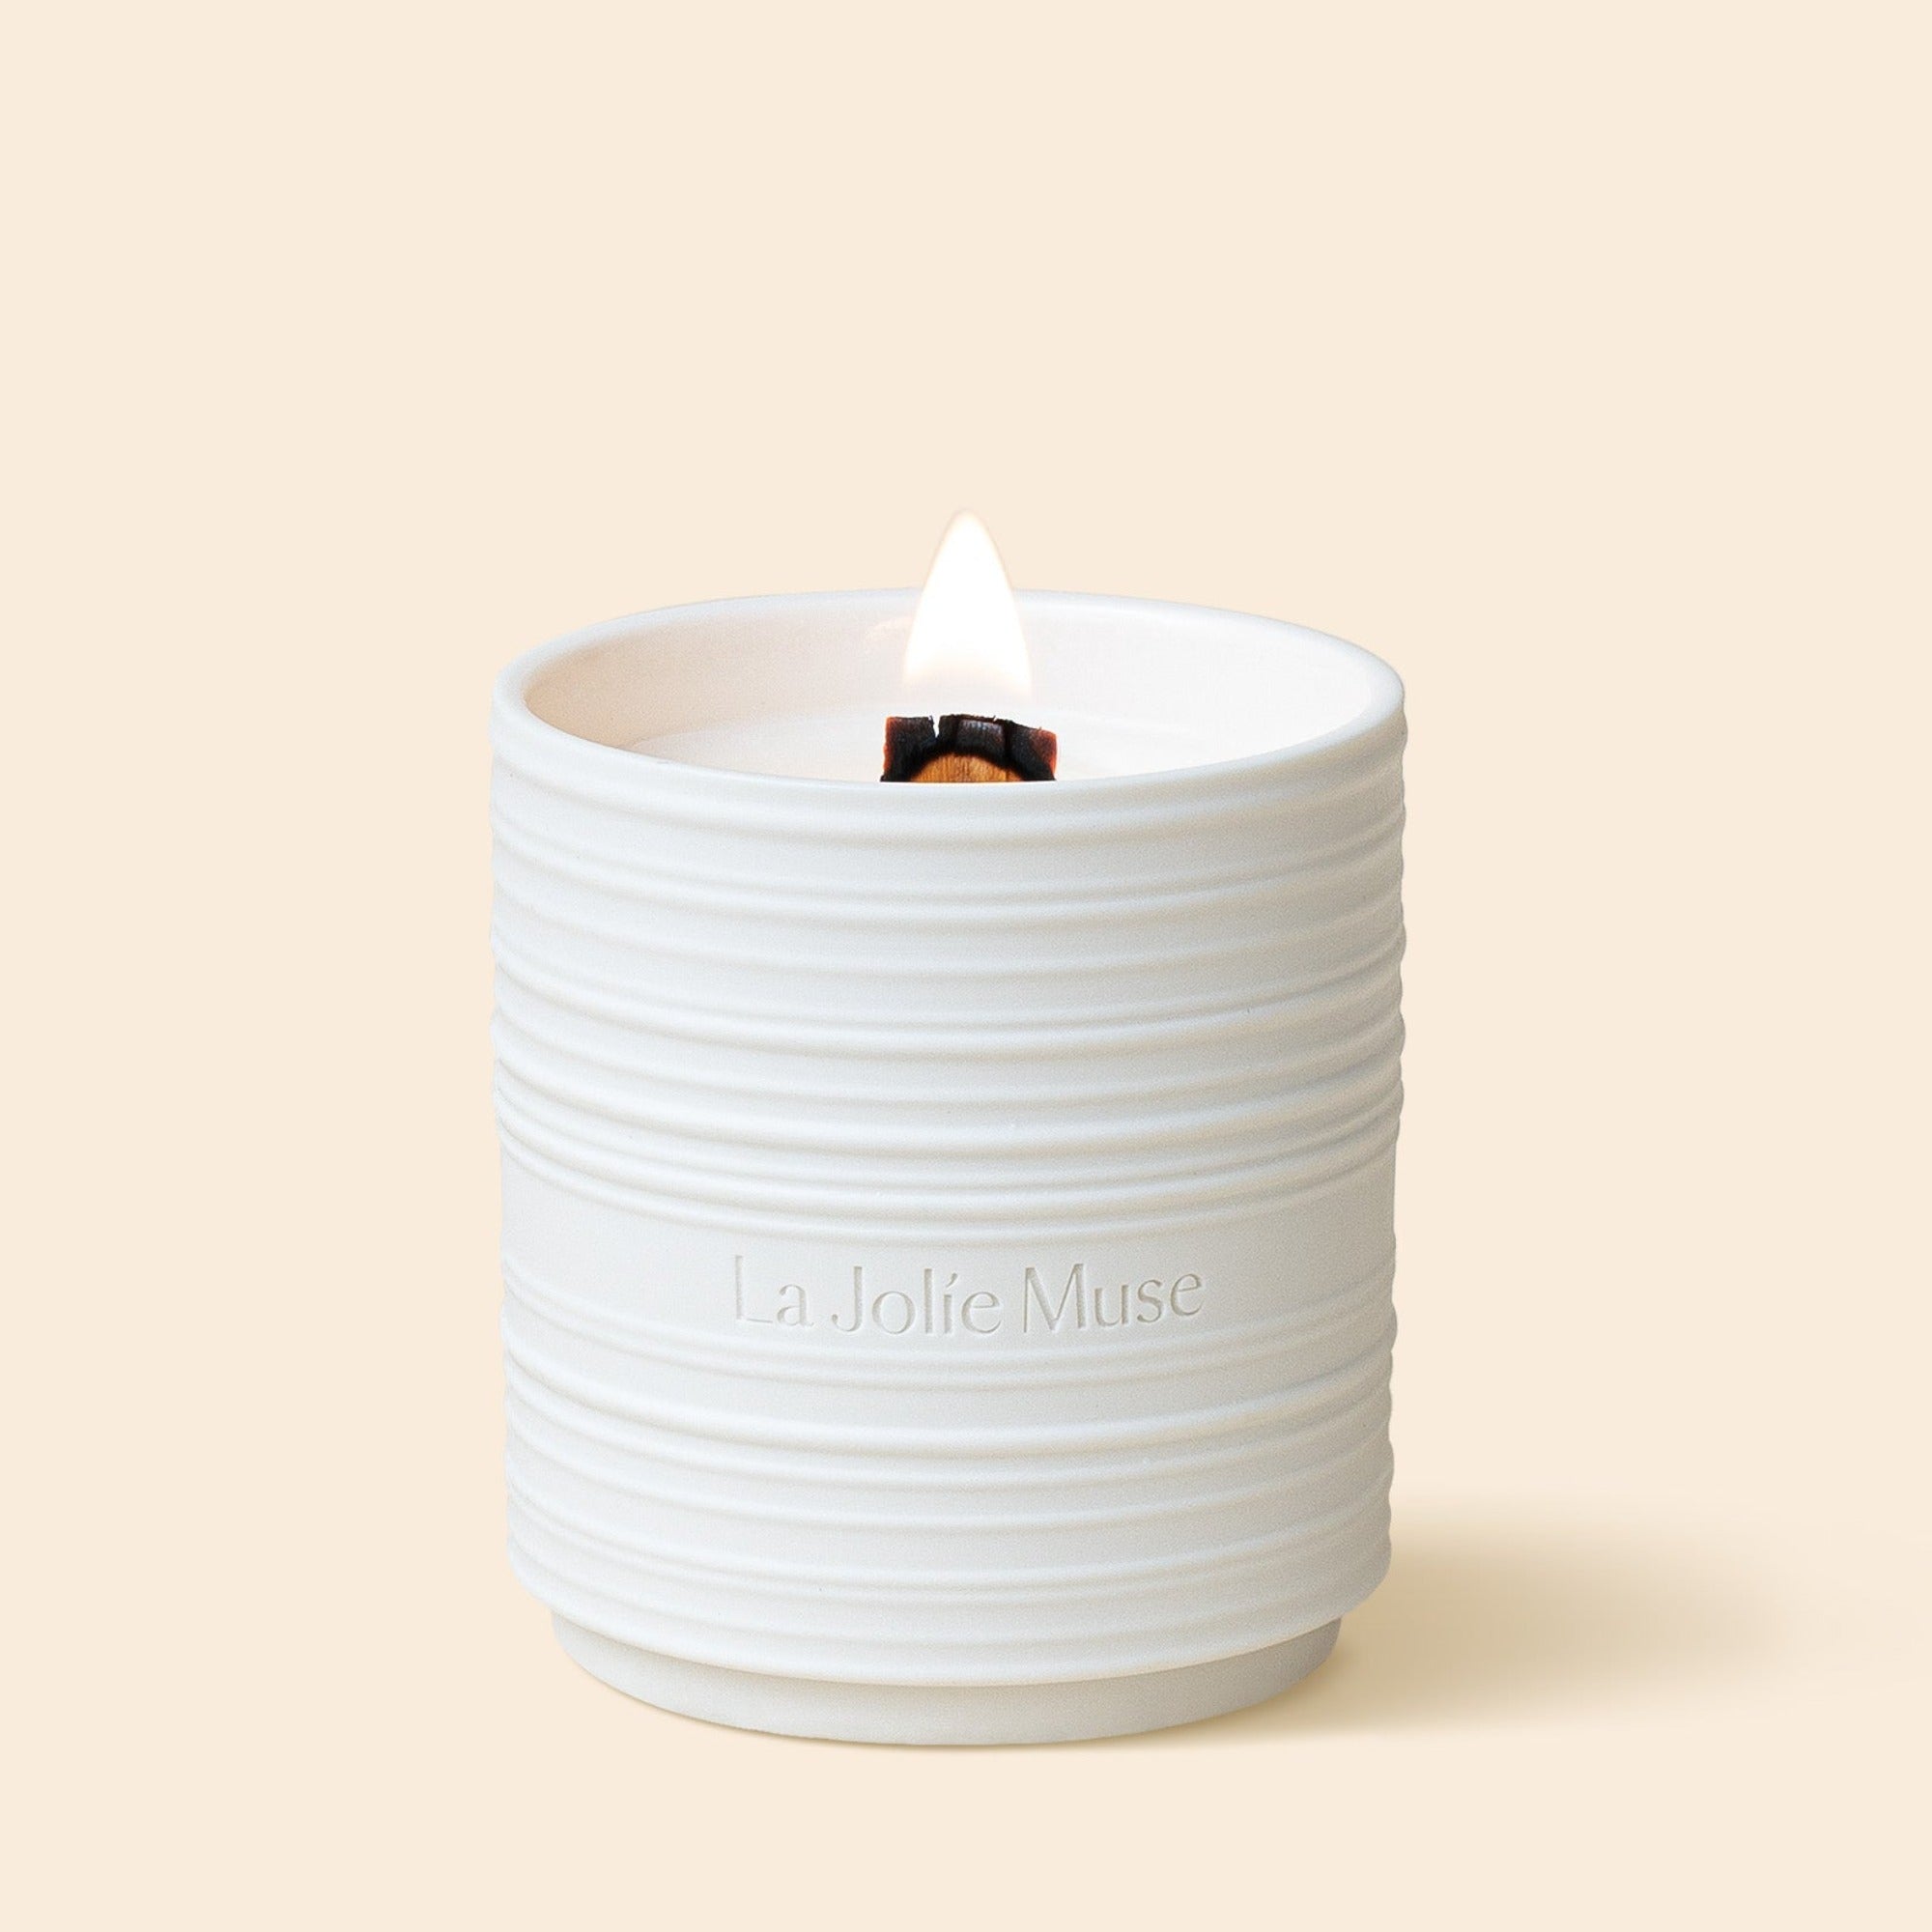 Product Shot of Lucienne - Mandarin Matcha 8oz candle in the middle